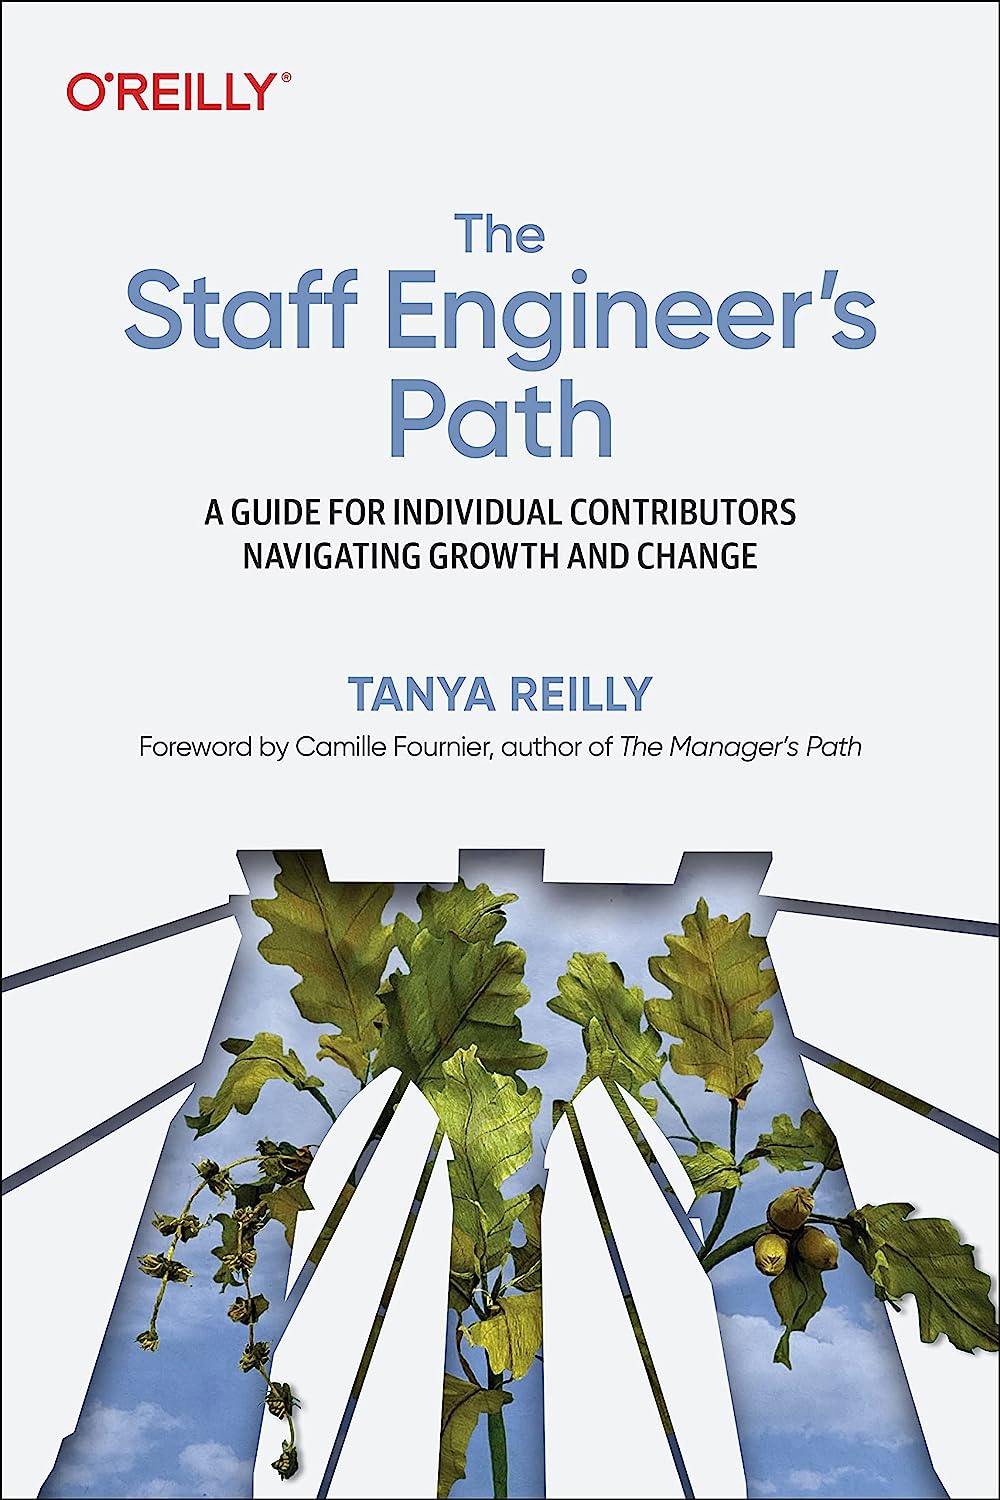 Book Summary: The Staff Engineer’s Path by Tanya Reilly